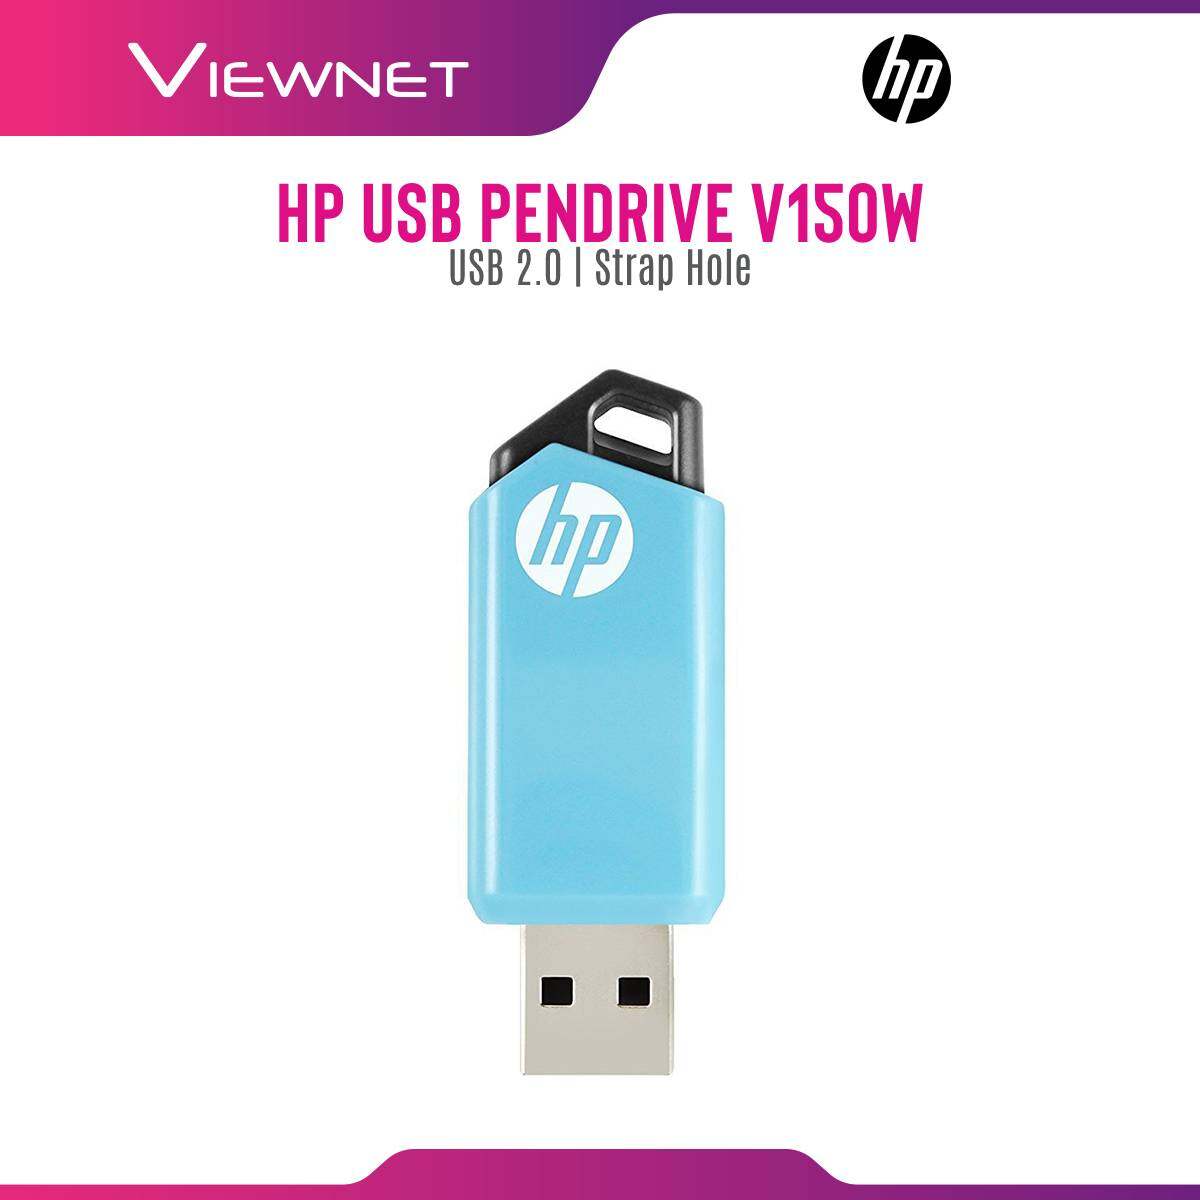 HP USB Pendrive V150W with USB 2.0 Connection, Slide To Open, Strap Hole